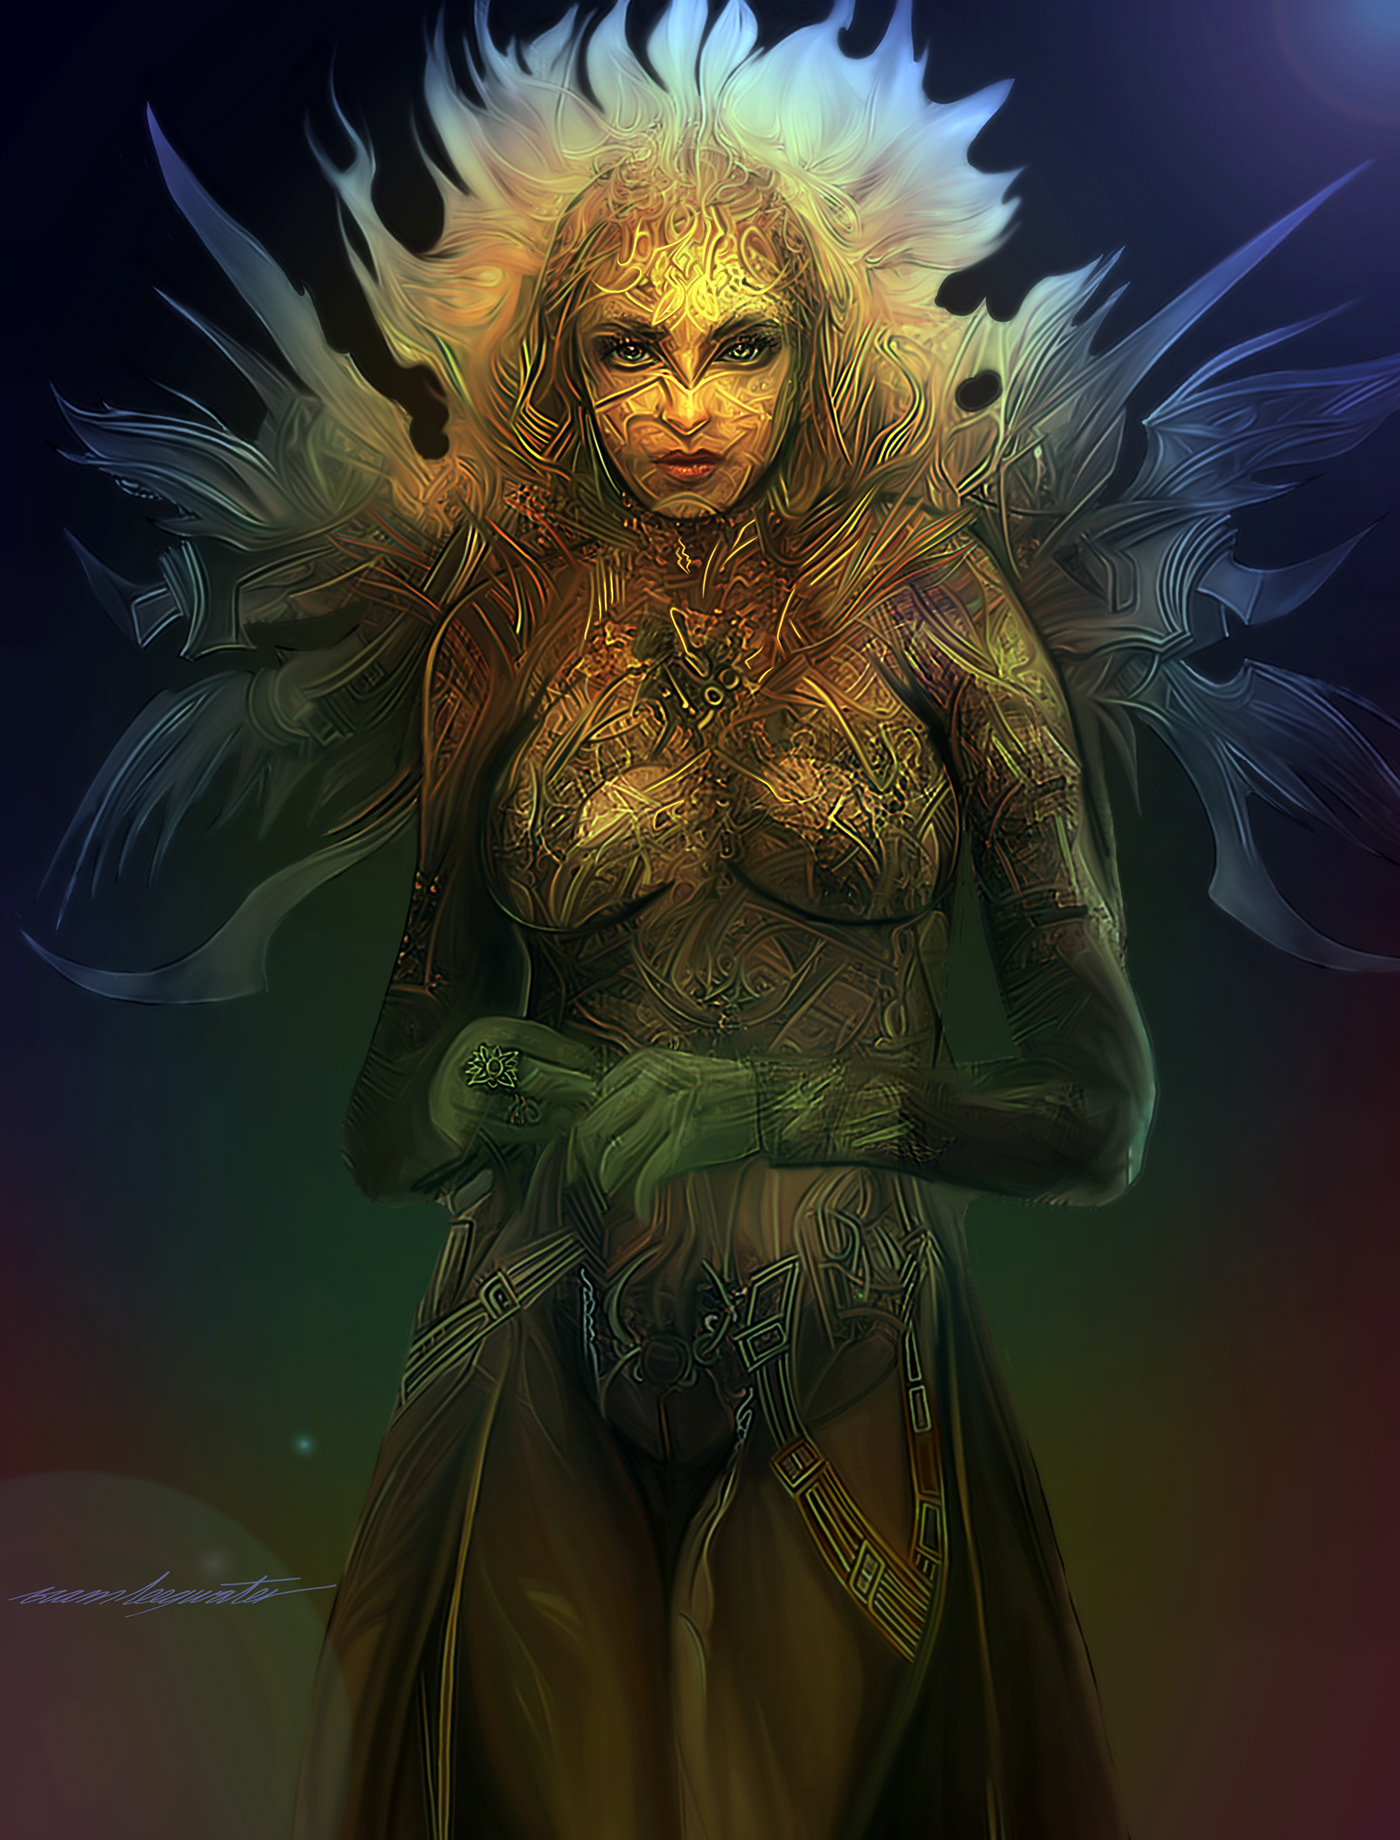 Gold characters character illustration madewithwacom final fantasy wacom bright colors magic the gathering bram leegwater gold colors fantasy art